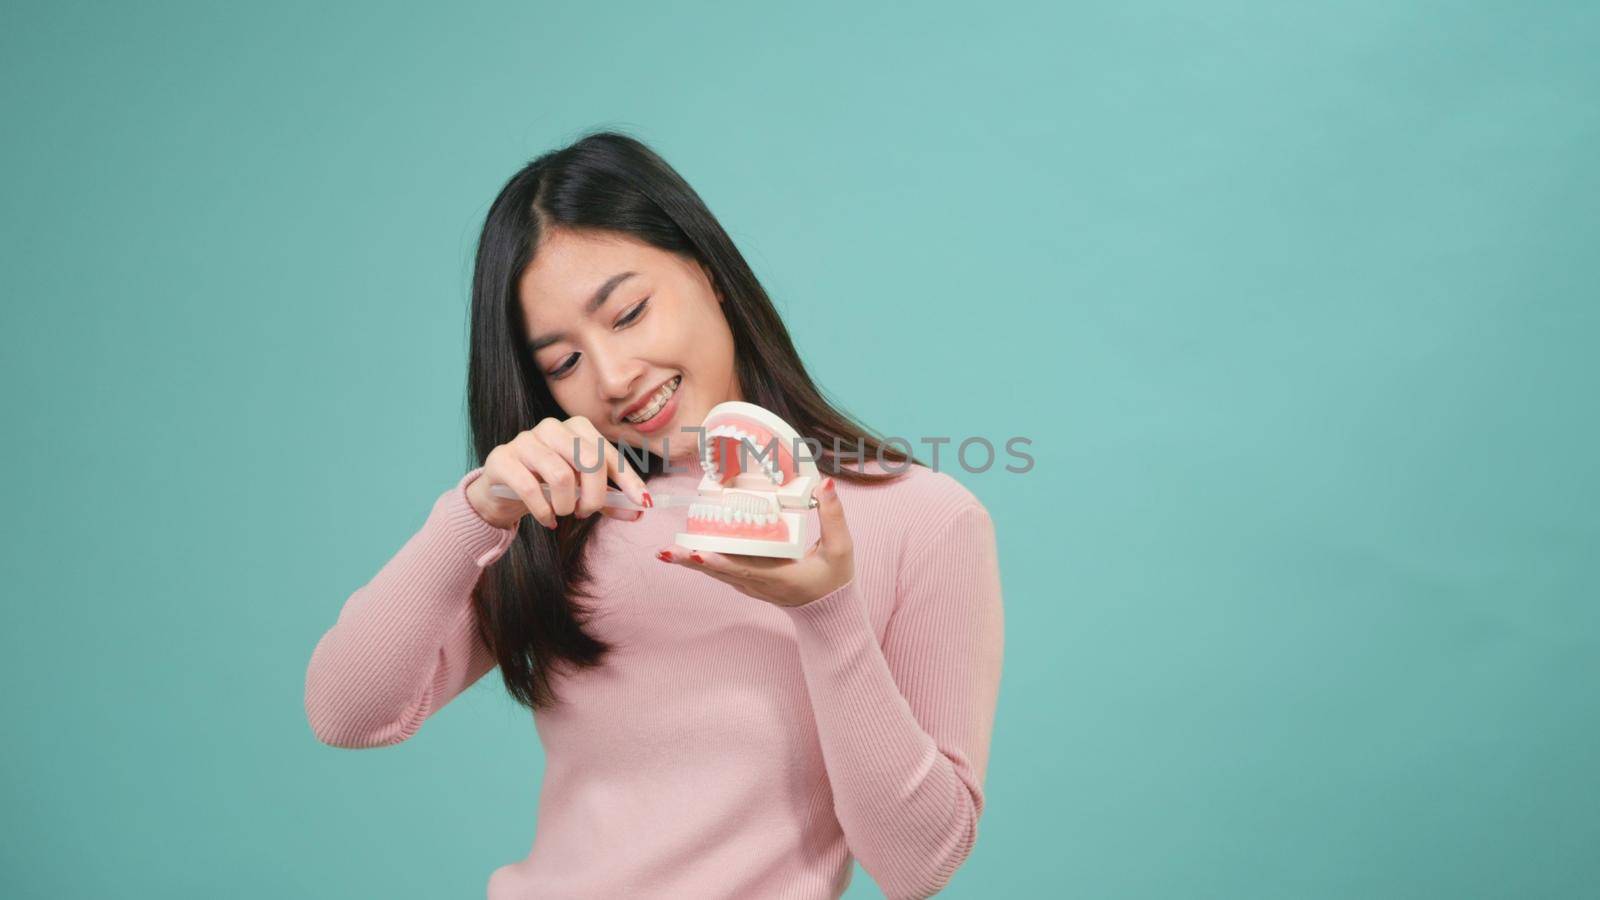 woman smile showing model how to clean the teeth with toothbrush by Sorapop